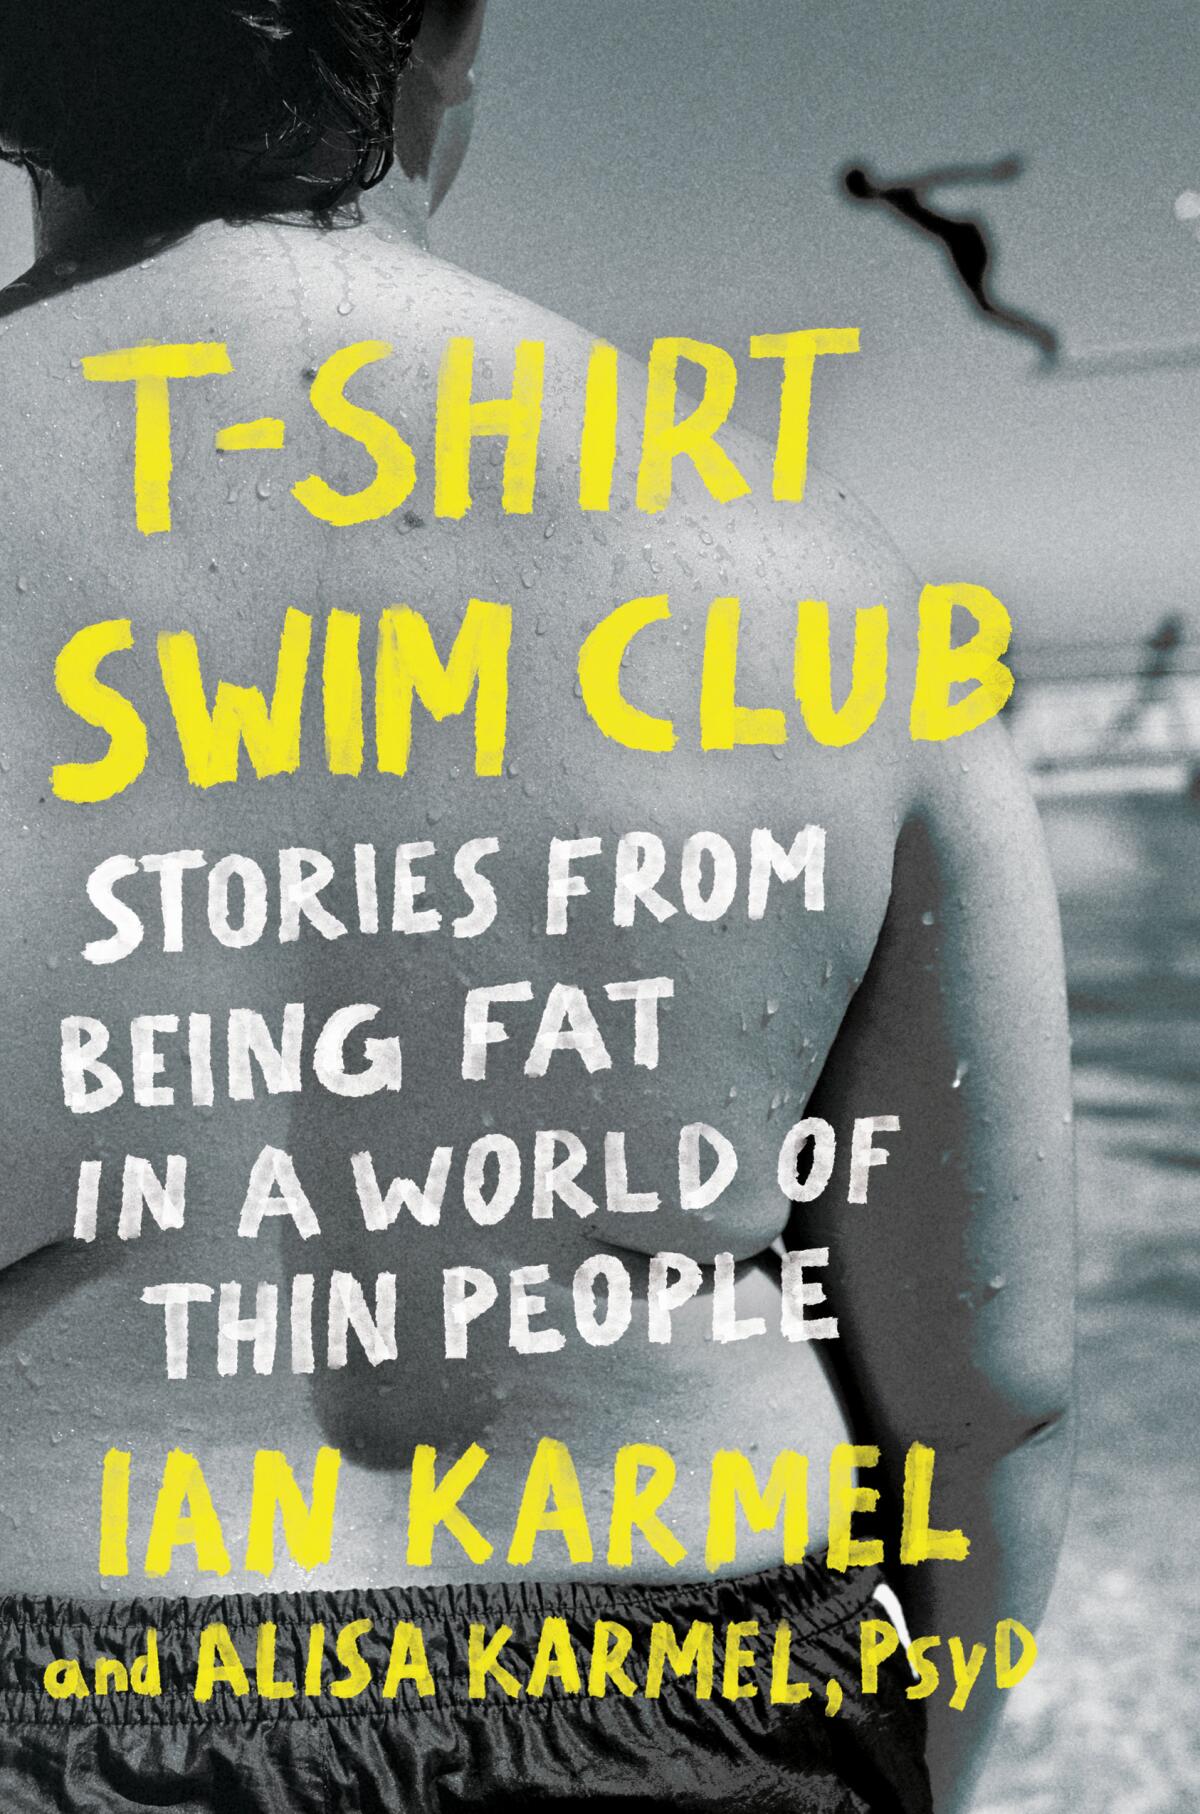 "T-Shirt Swim Club: Stories From Being Fat in a World of Thin People" by Ian Karmel